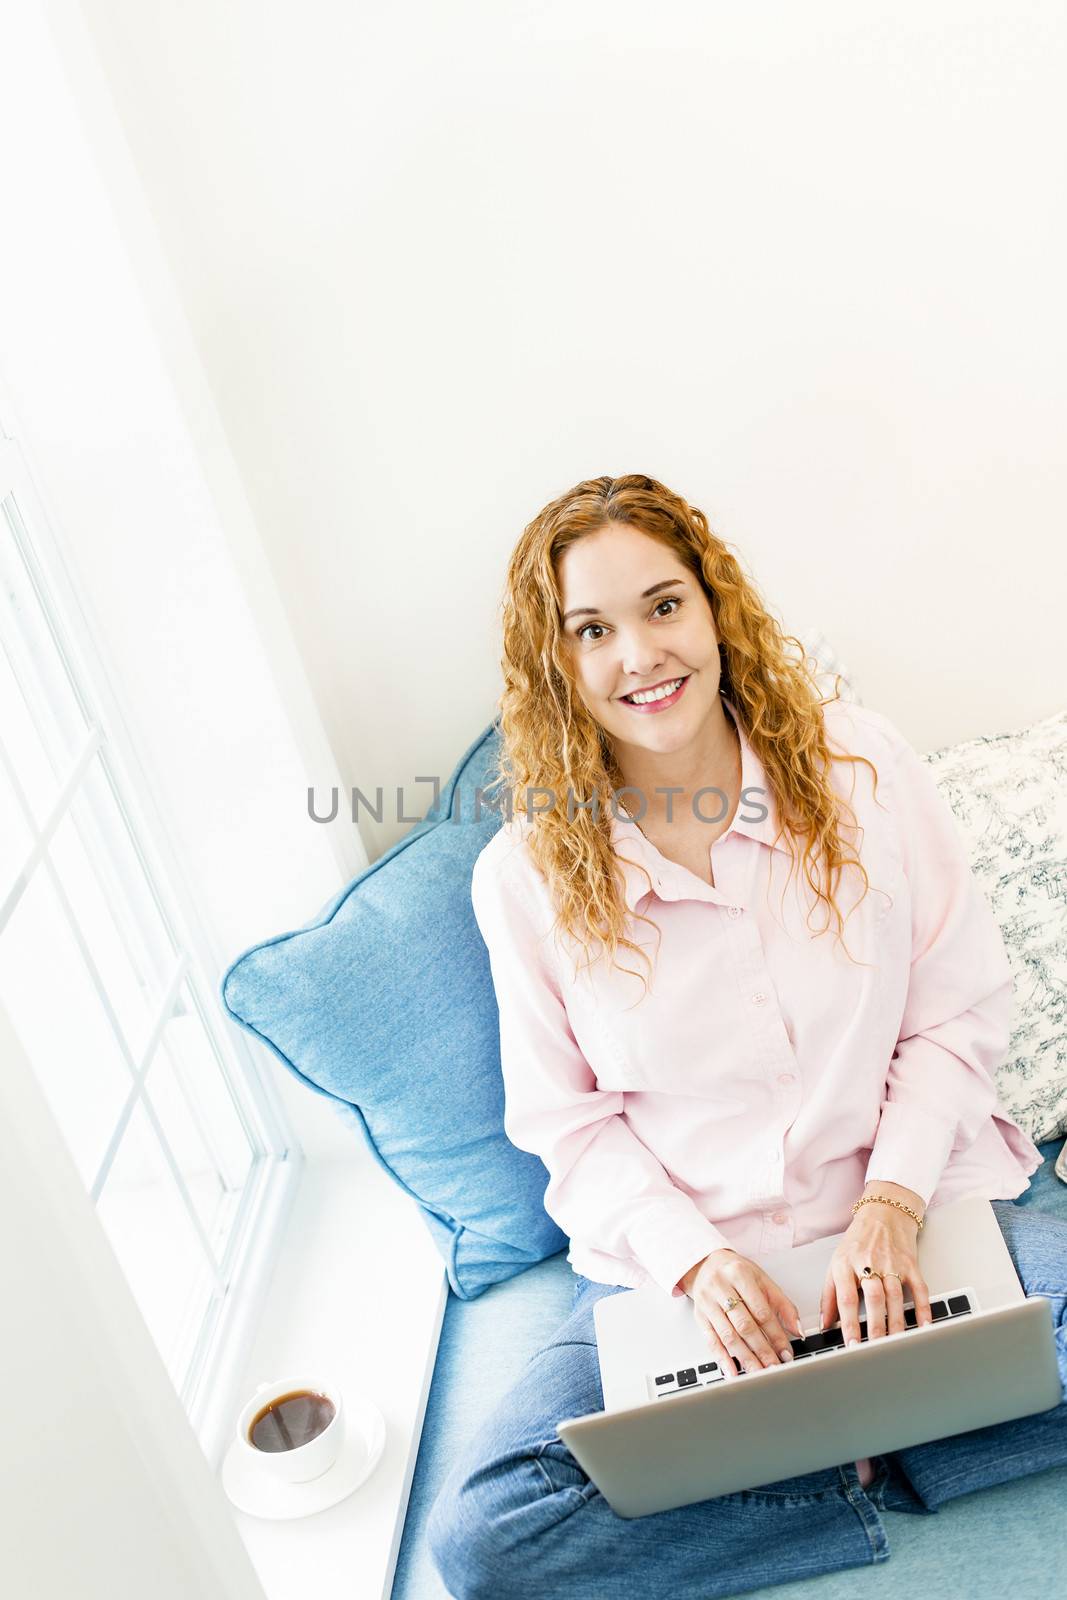 Caucasian woman with laptop computer looking up sitting on couch at home